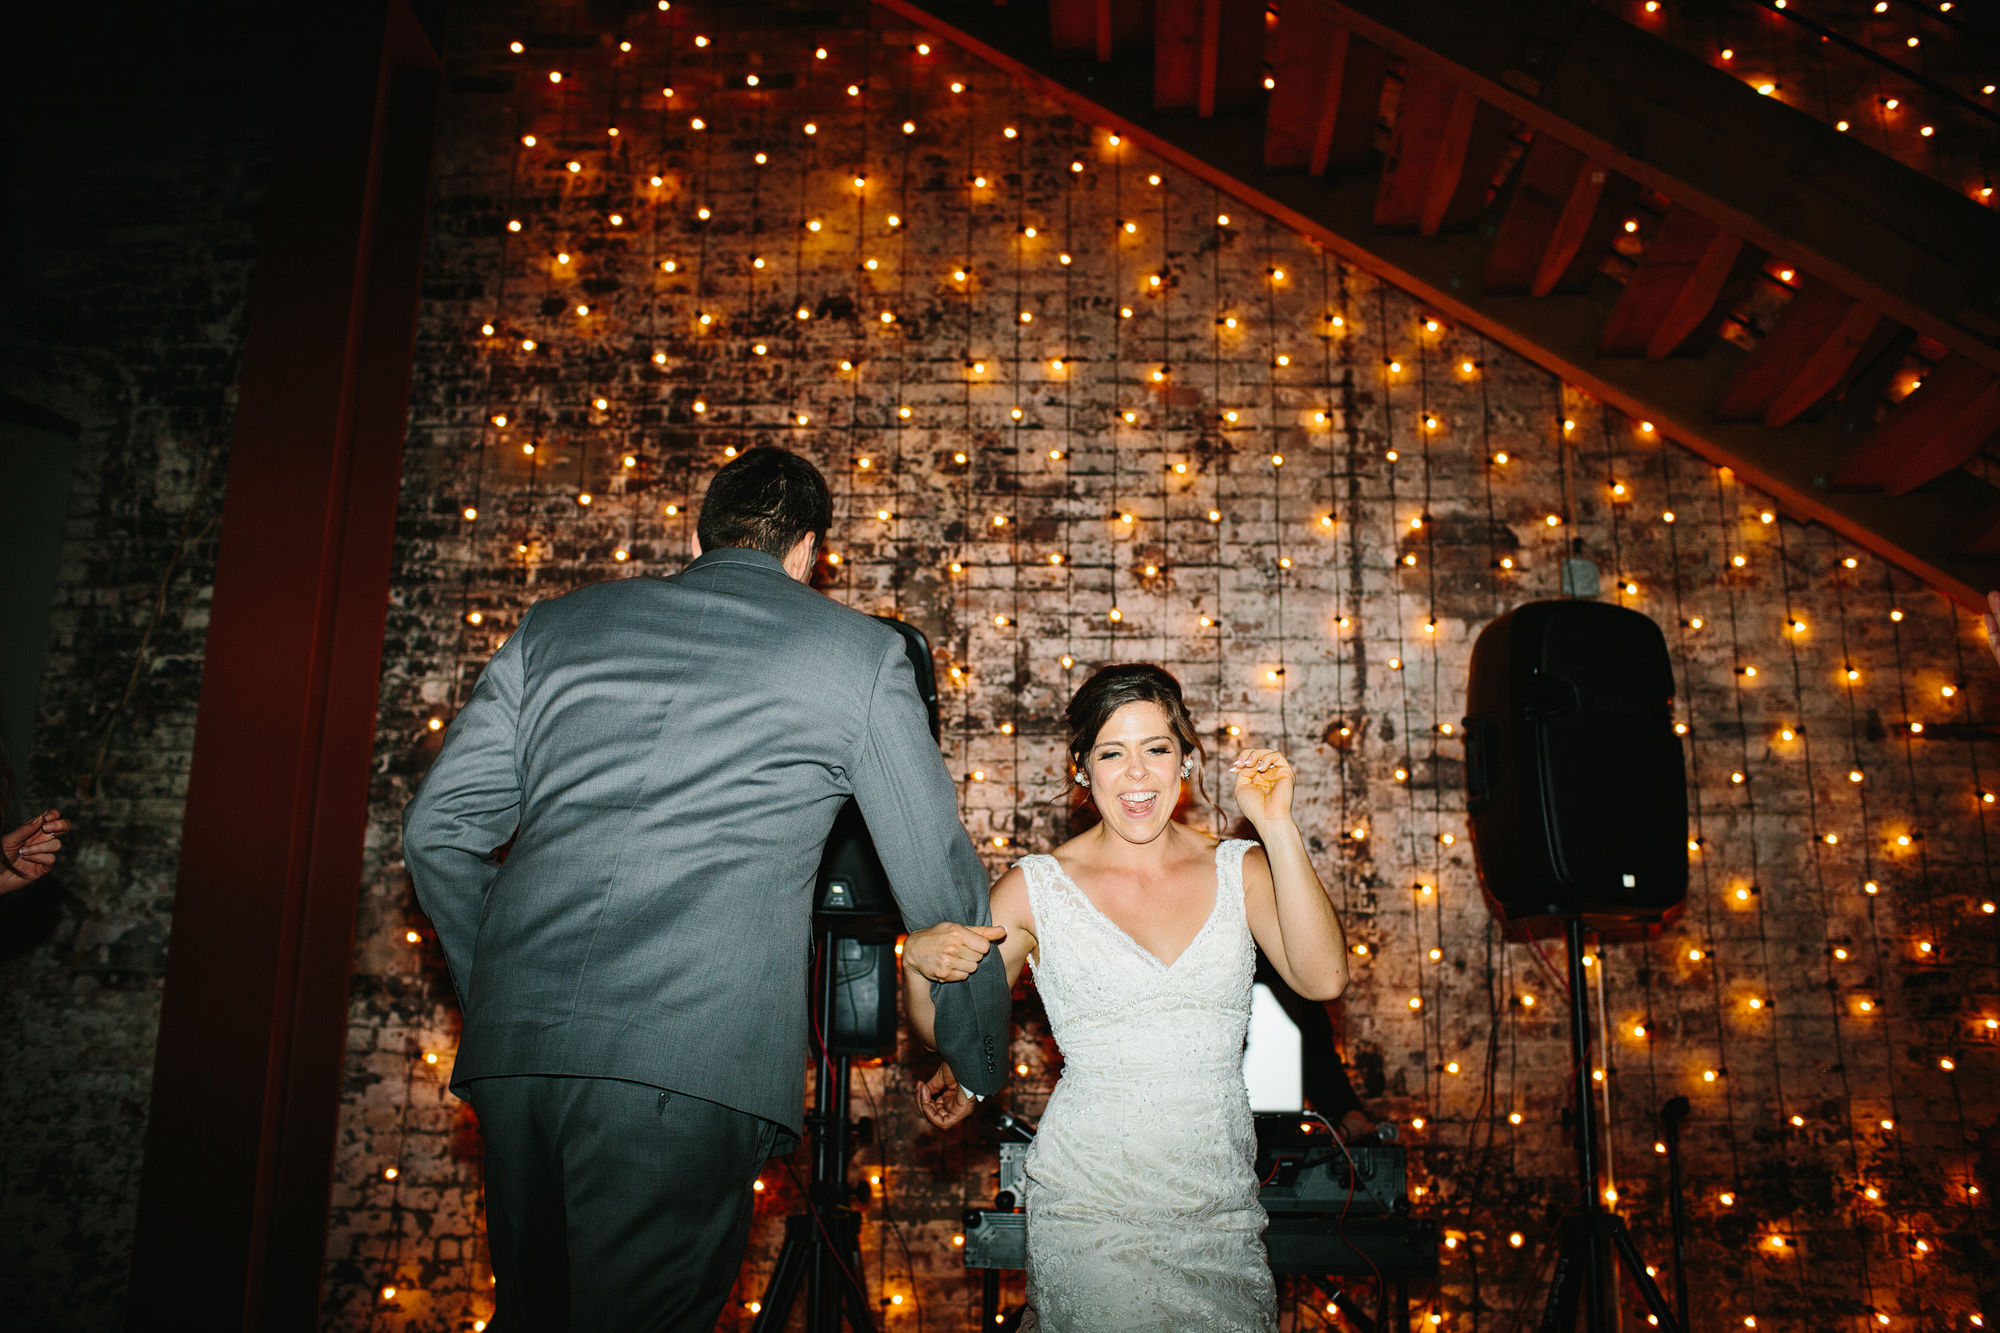 This is a photo of Rachel and Seth cutting a rug!